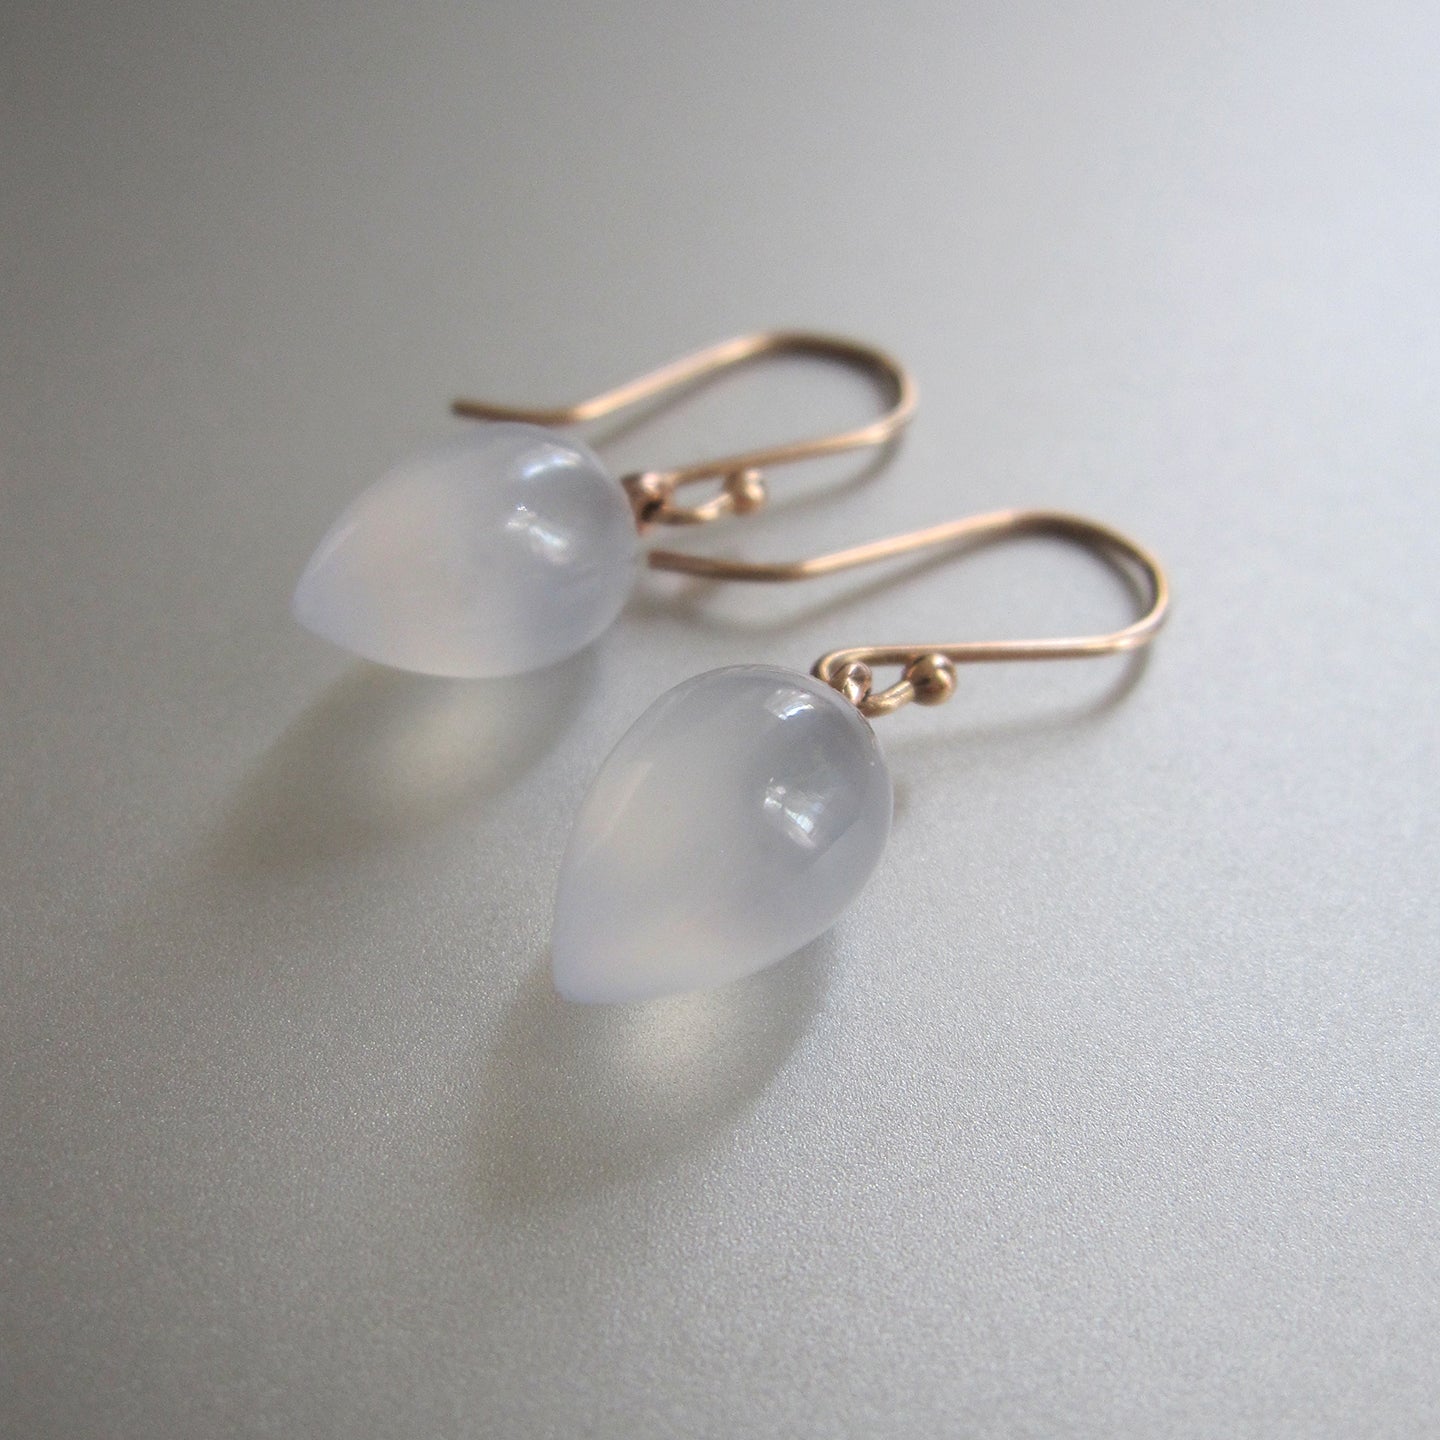 Light Blue Chalcedony Pointed Drops, Solid 14k Rose Gold Earrings